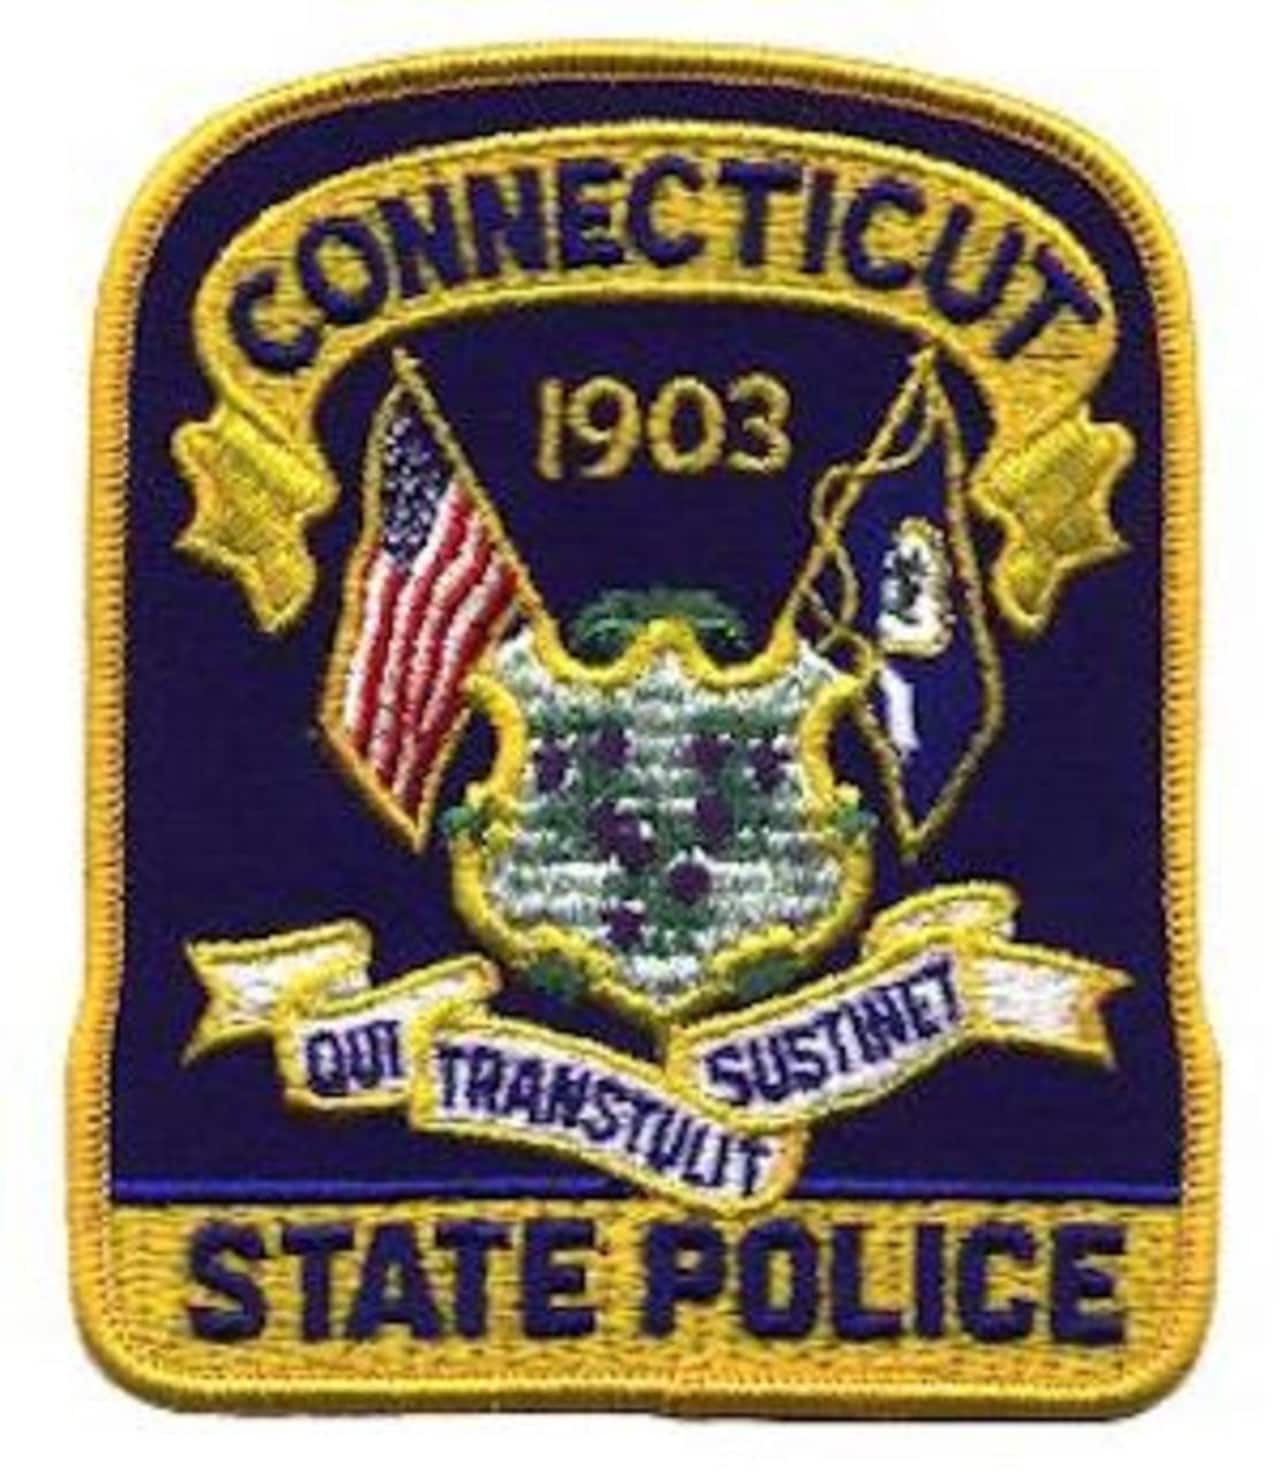 Connecticut State Police responded to the bus incident on I-95.